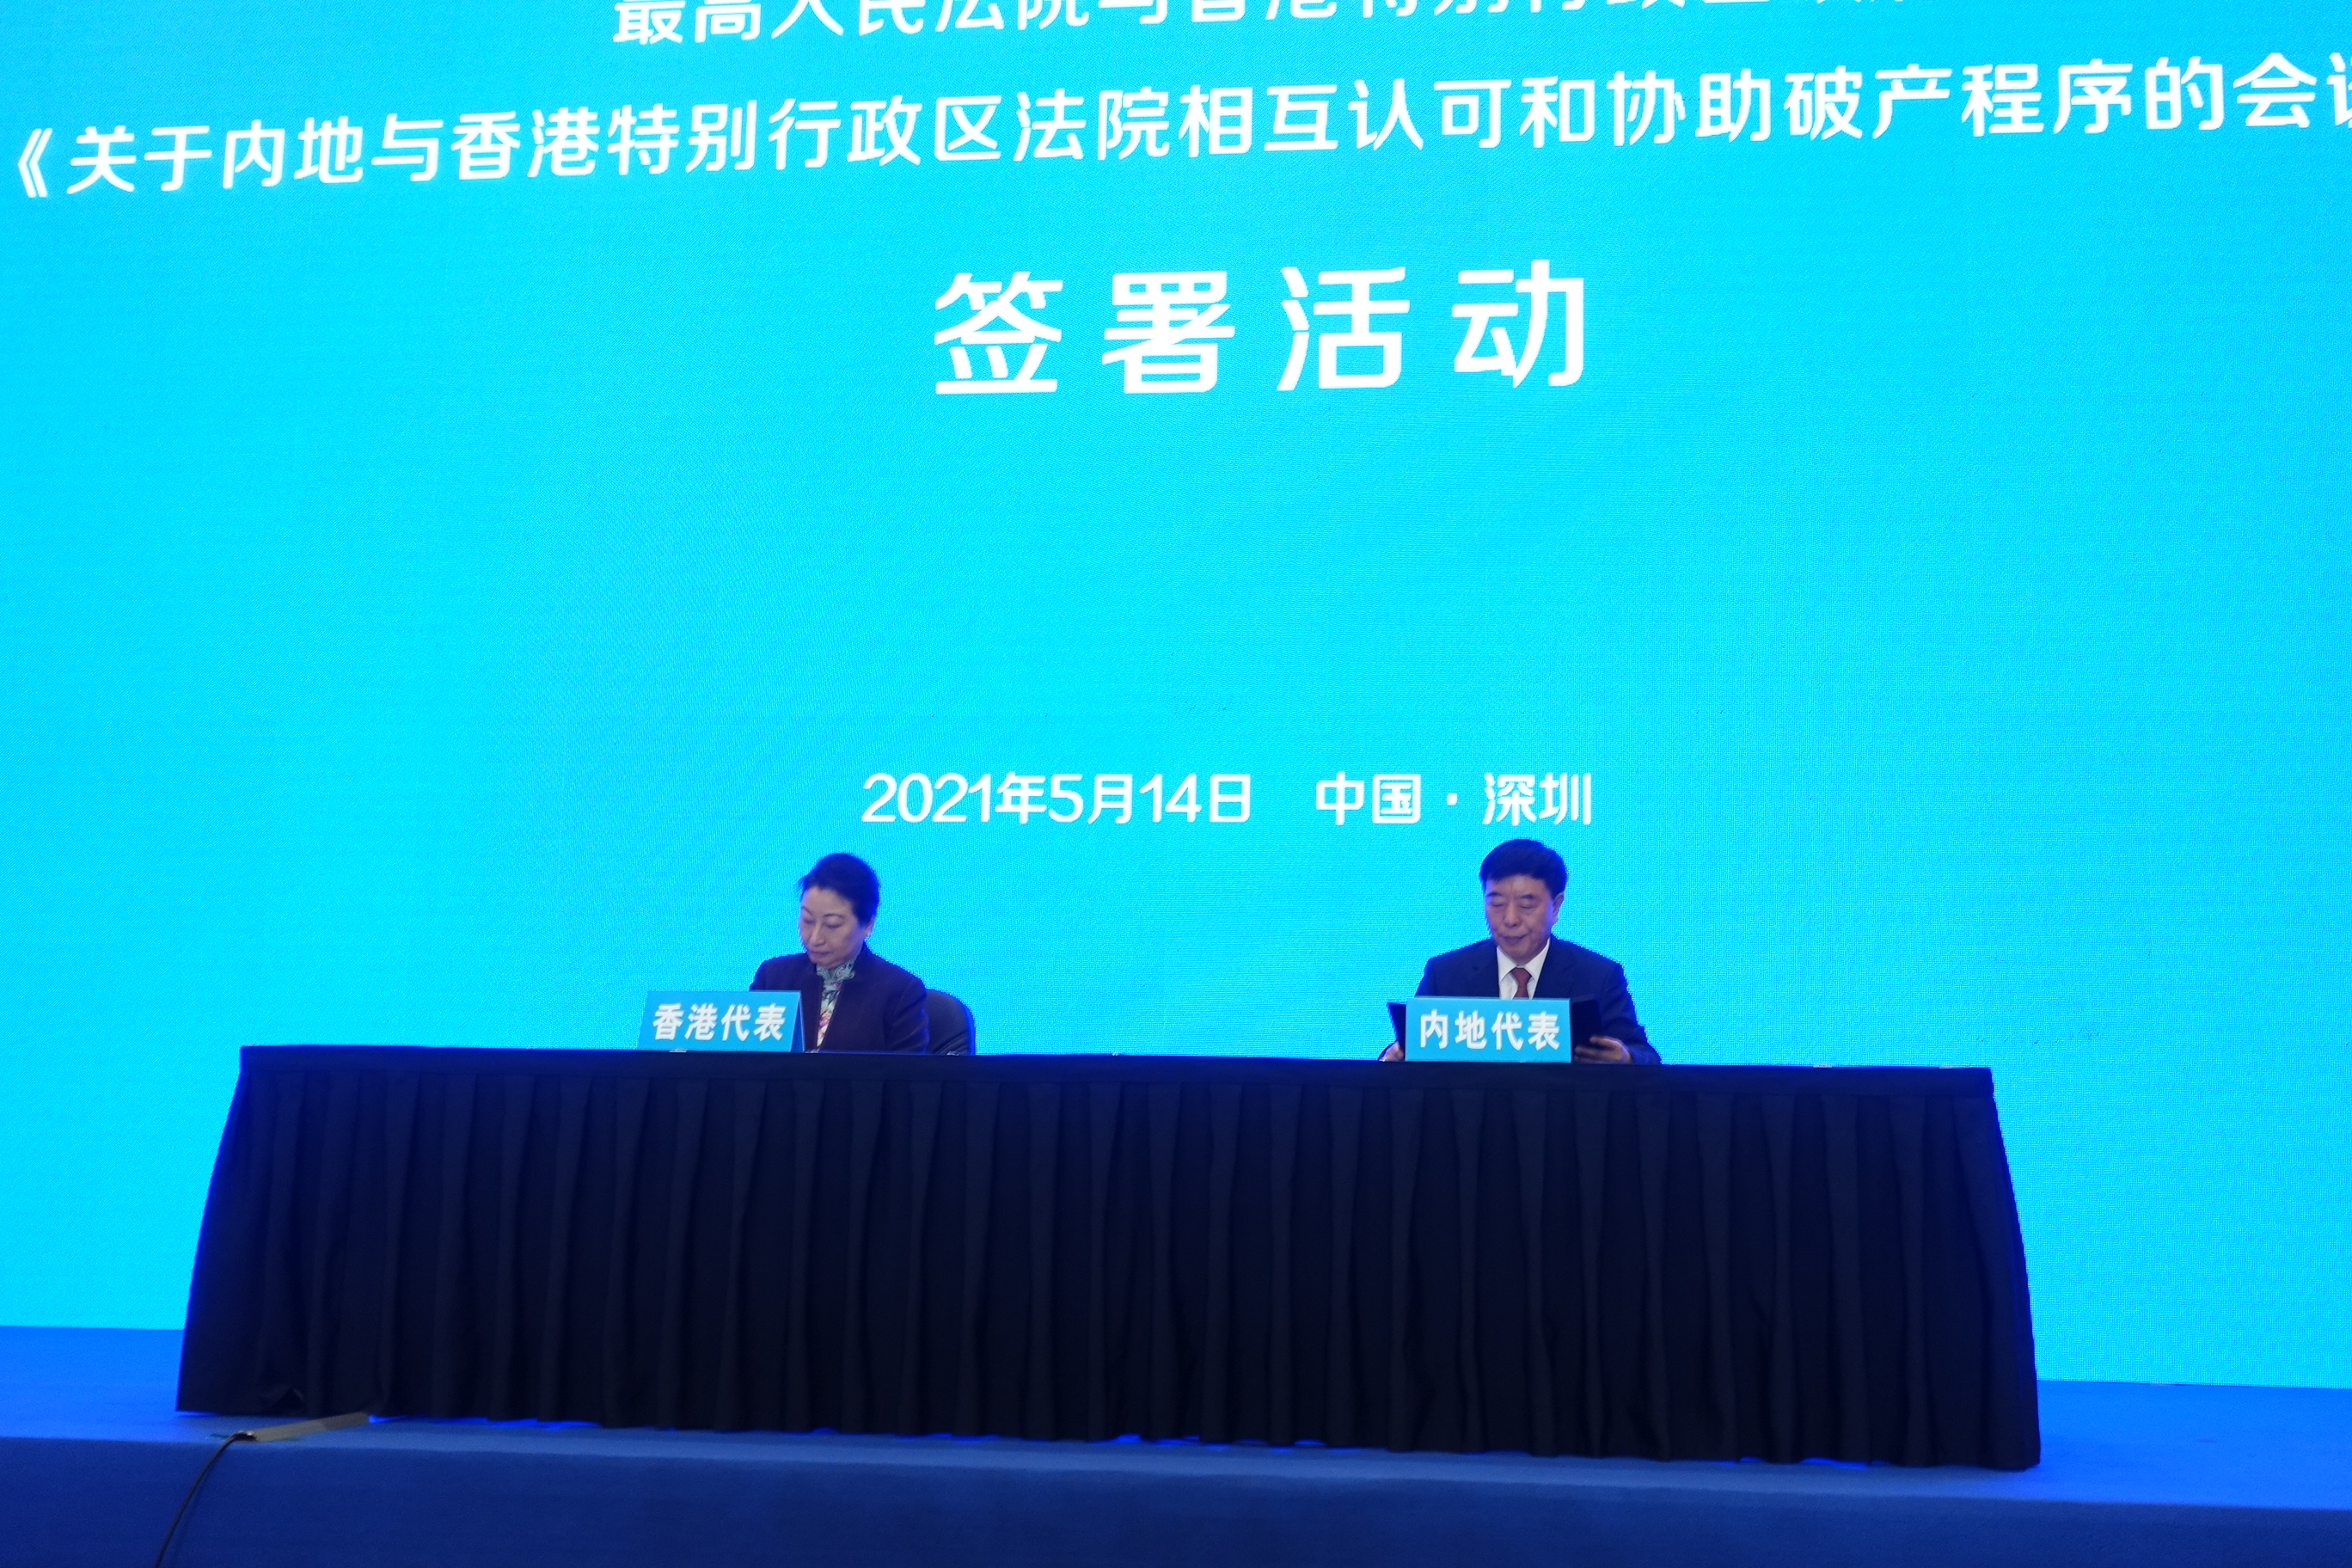 The Secretary for Justice, Ms Teresa Cheng, SC (left), and Vice-president of the Supreme People's Court Mr Yang Wanming (right) sign the record of meeting concerning mutual recognition of and assistance to insolvency proceedings between the courts of the Mainland and the Hong Kong Special Administrative Region in Shenzhen today (May 14).